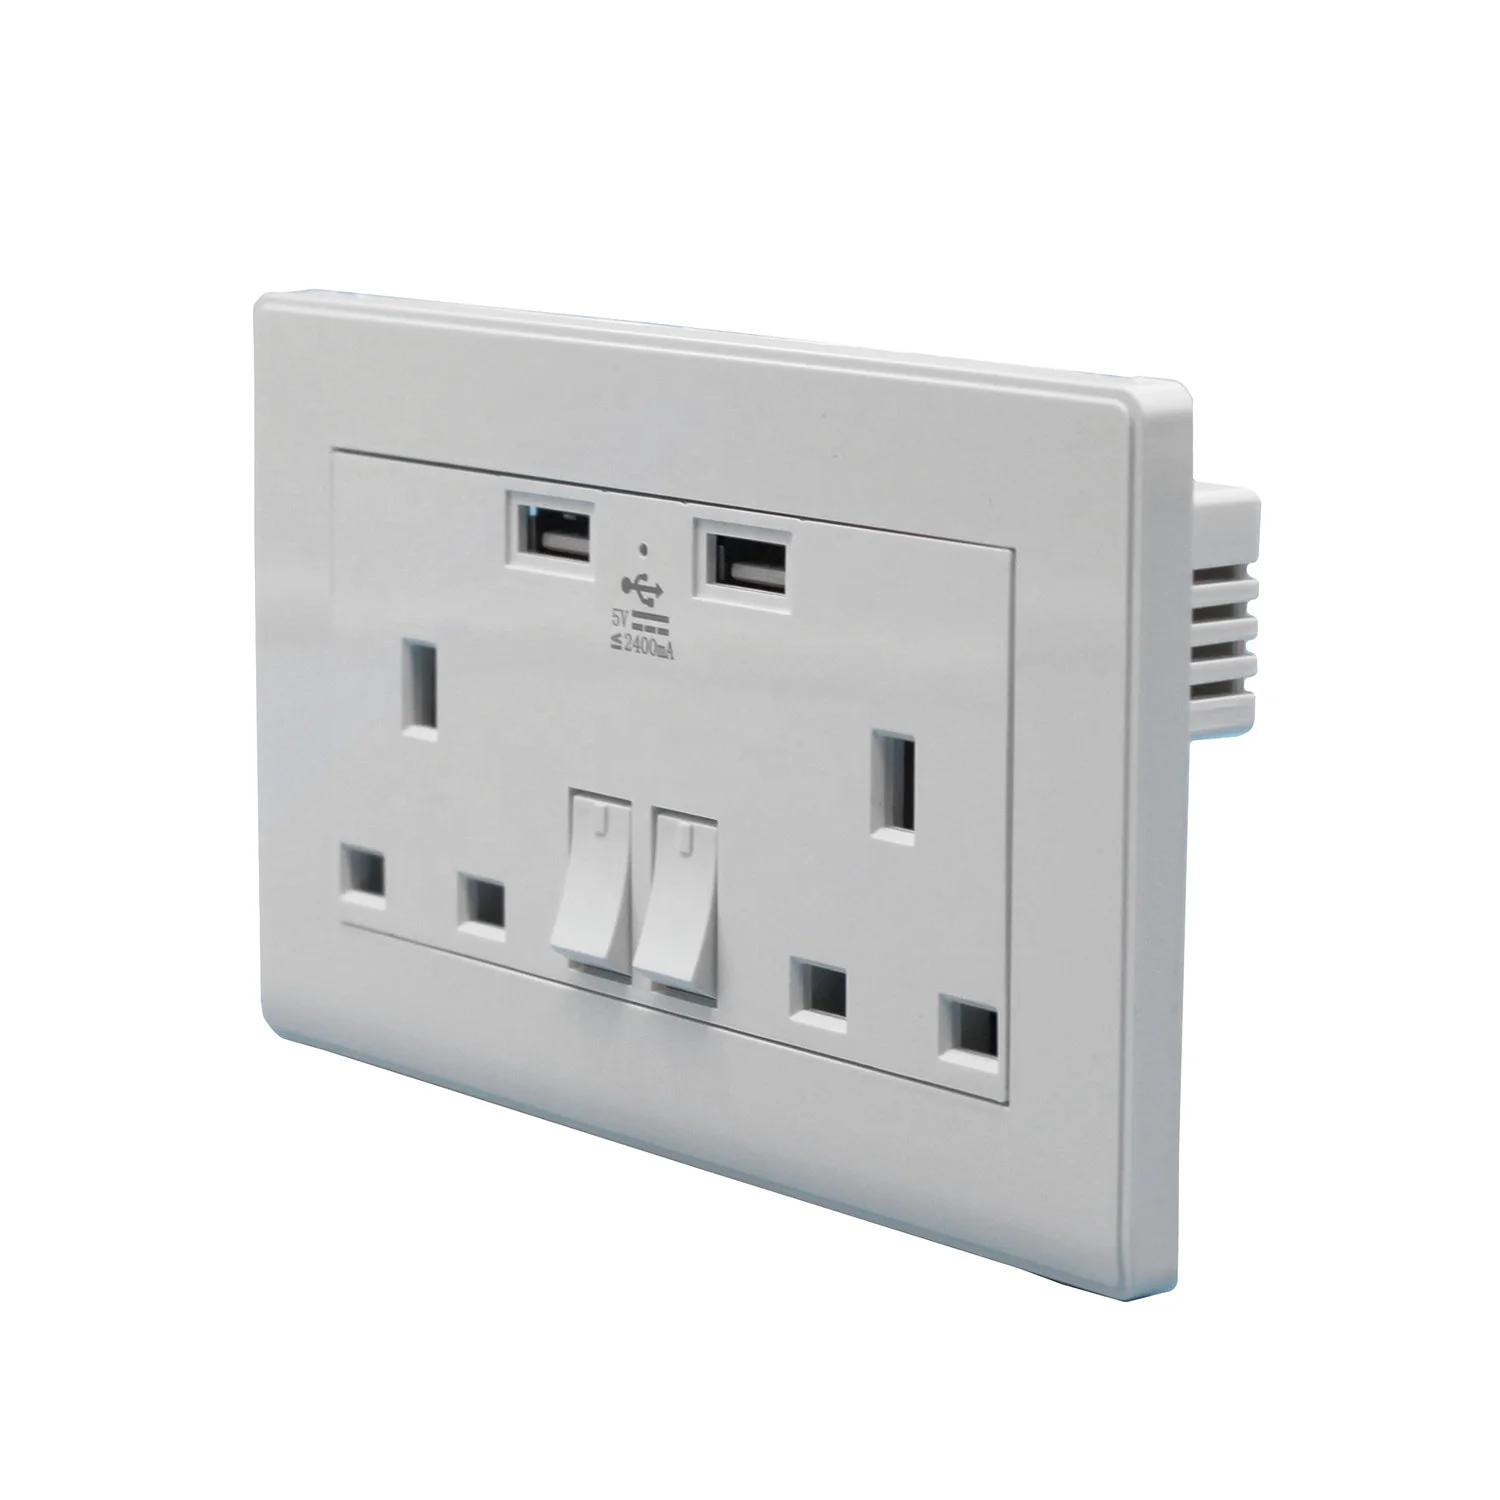 2 Way UK Mains Power Socket With USB Charging Ports Connection Wall Plate Plug 